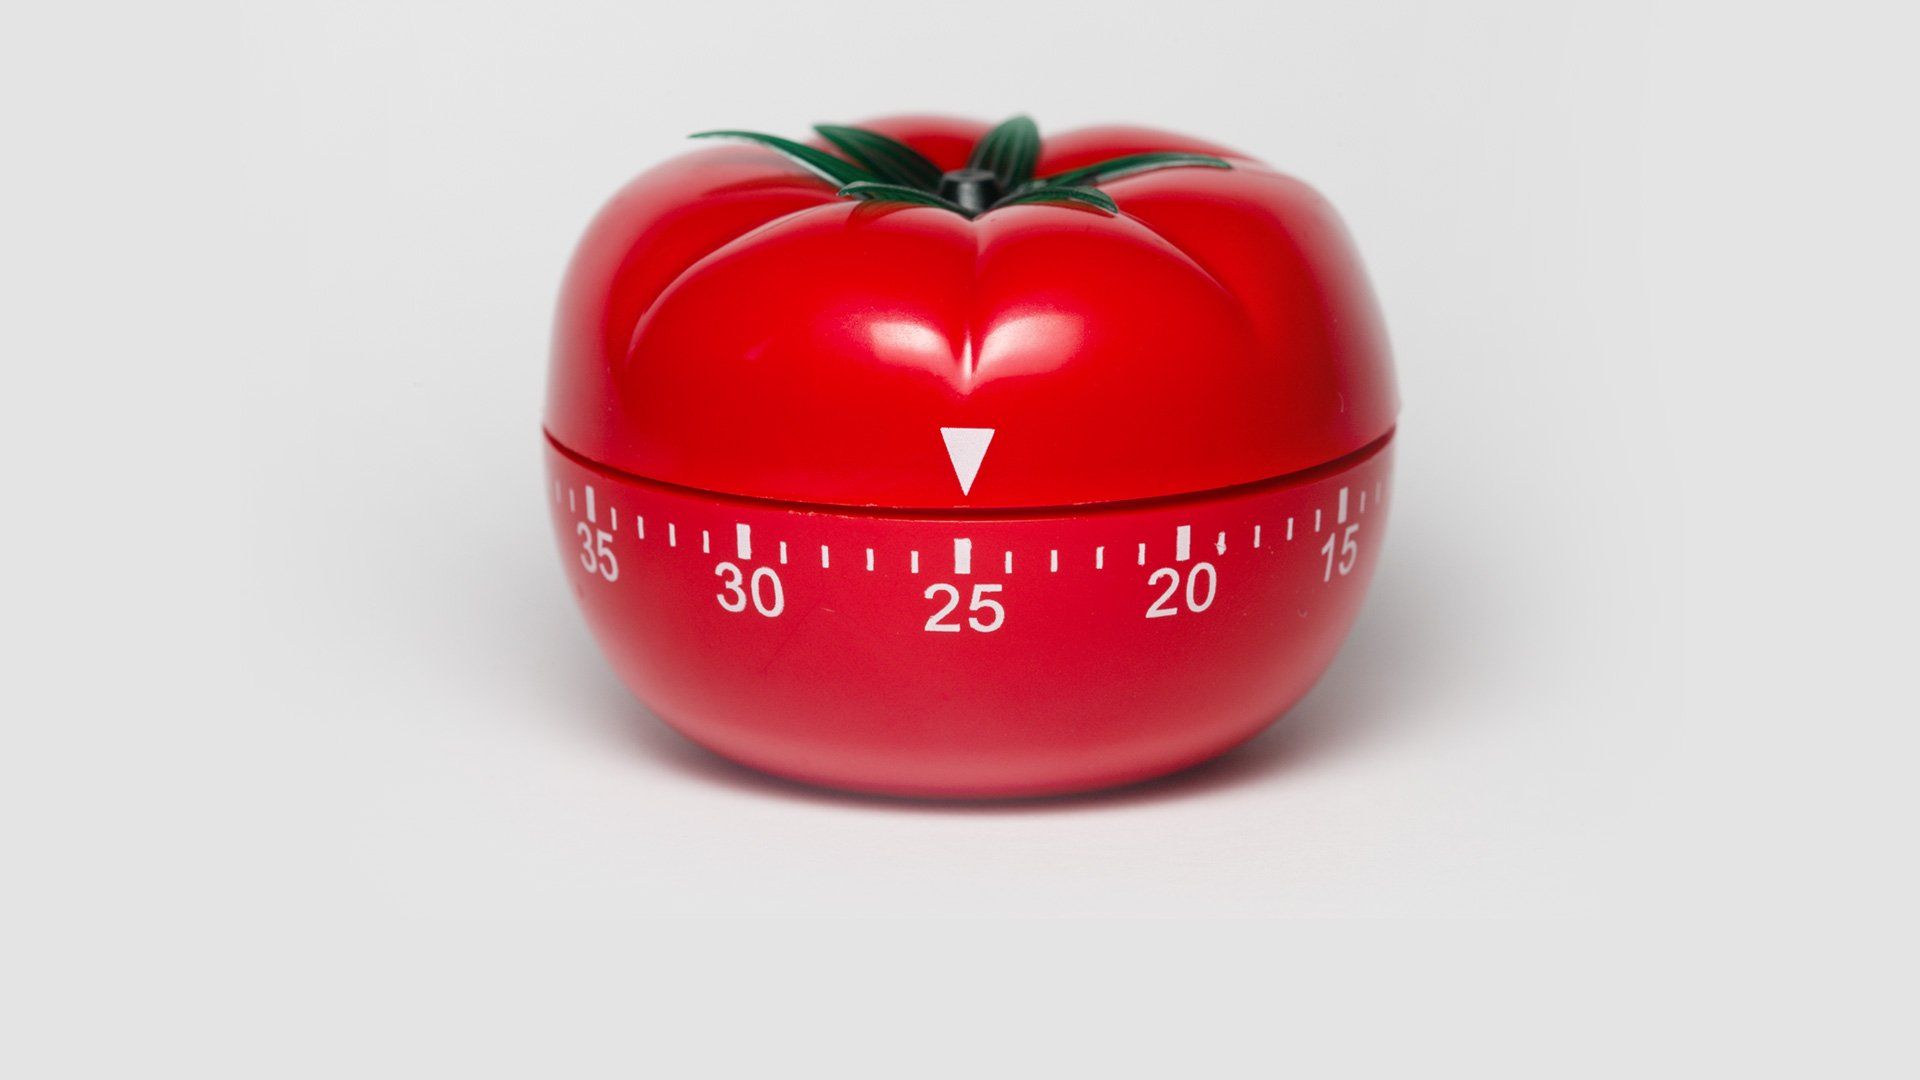 the pomodoro cycle picture